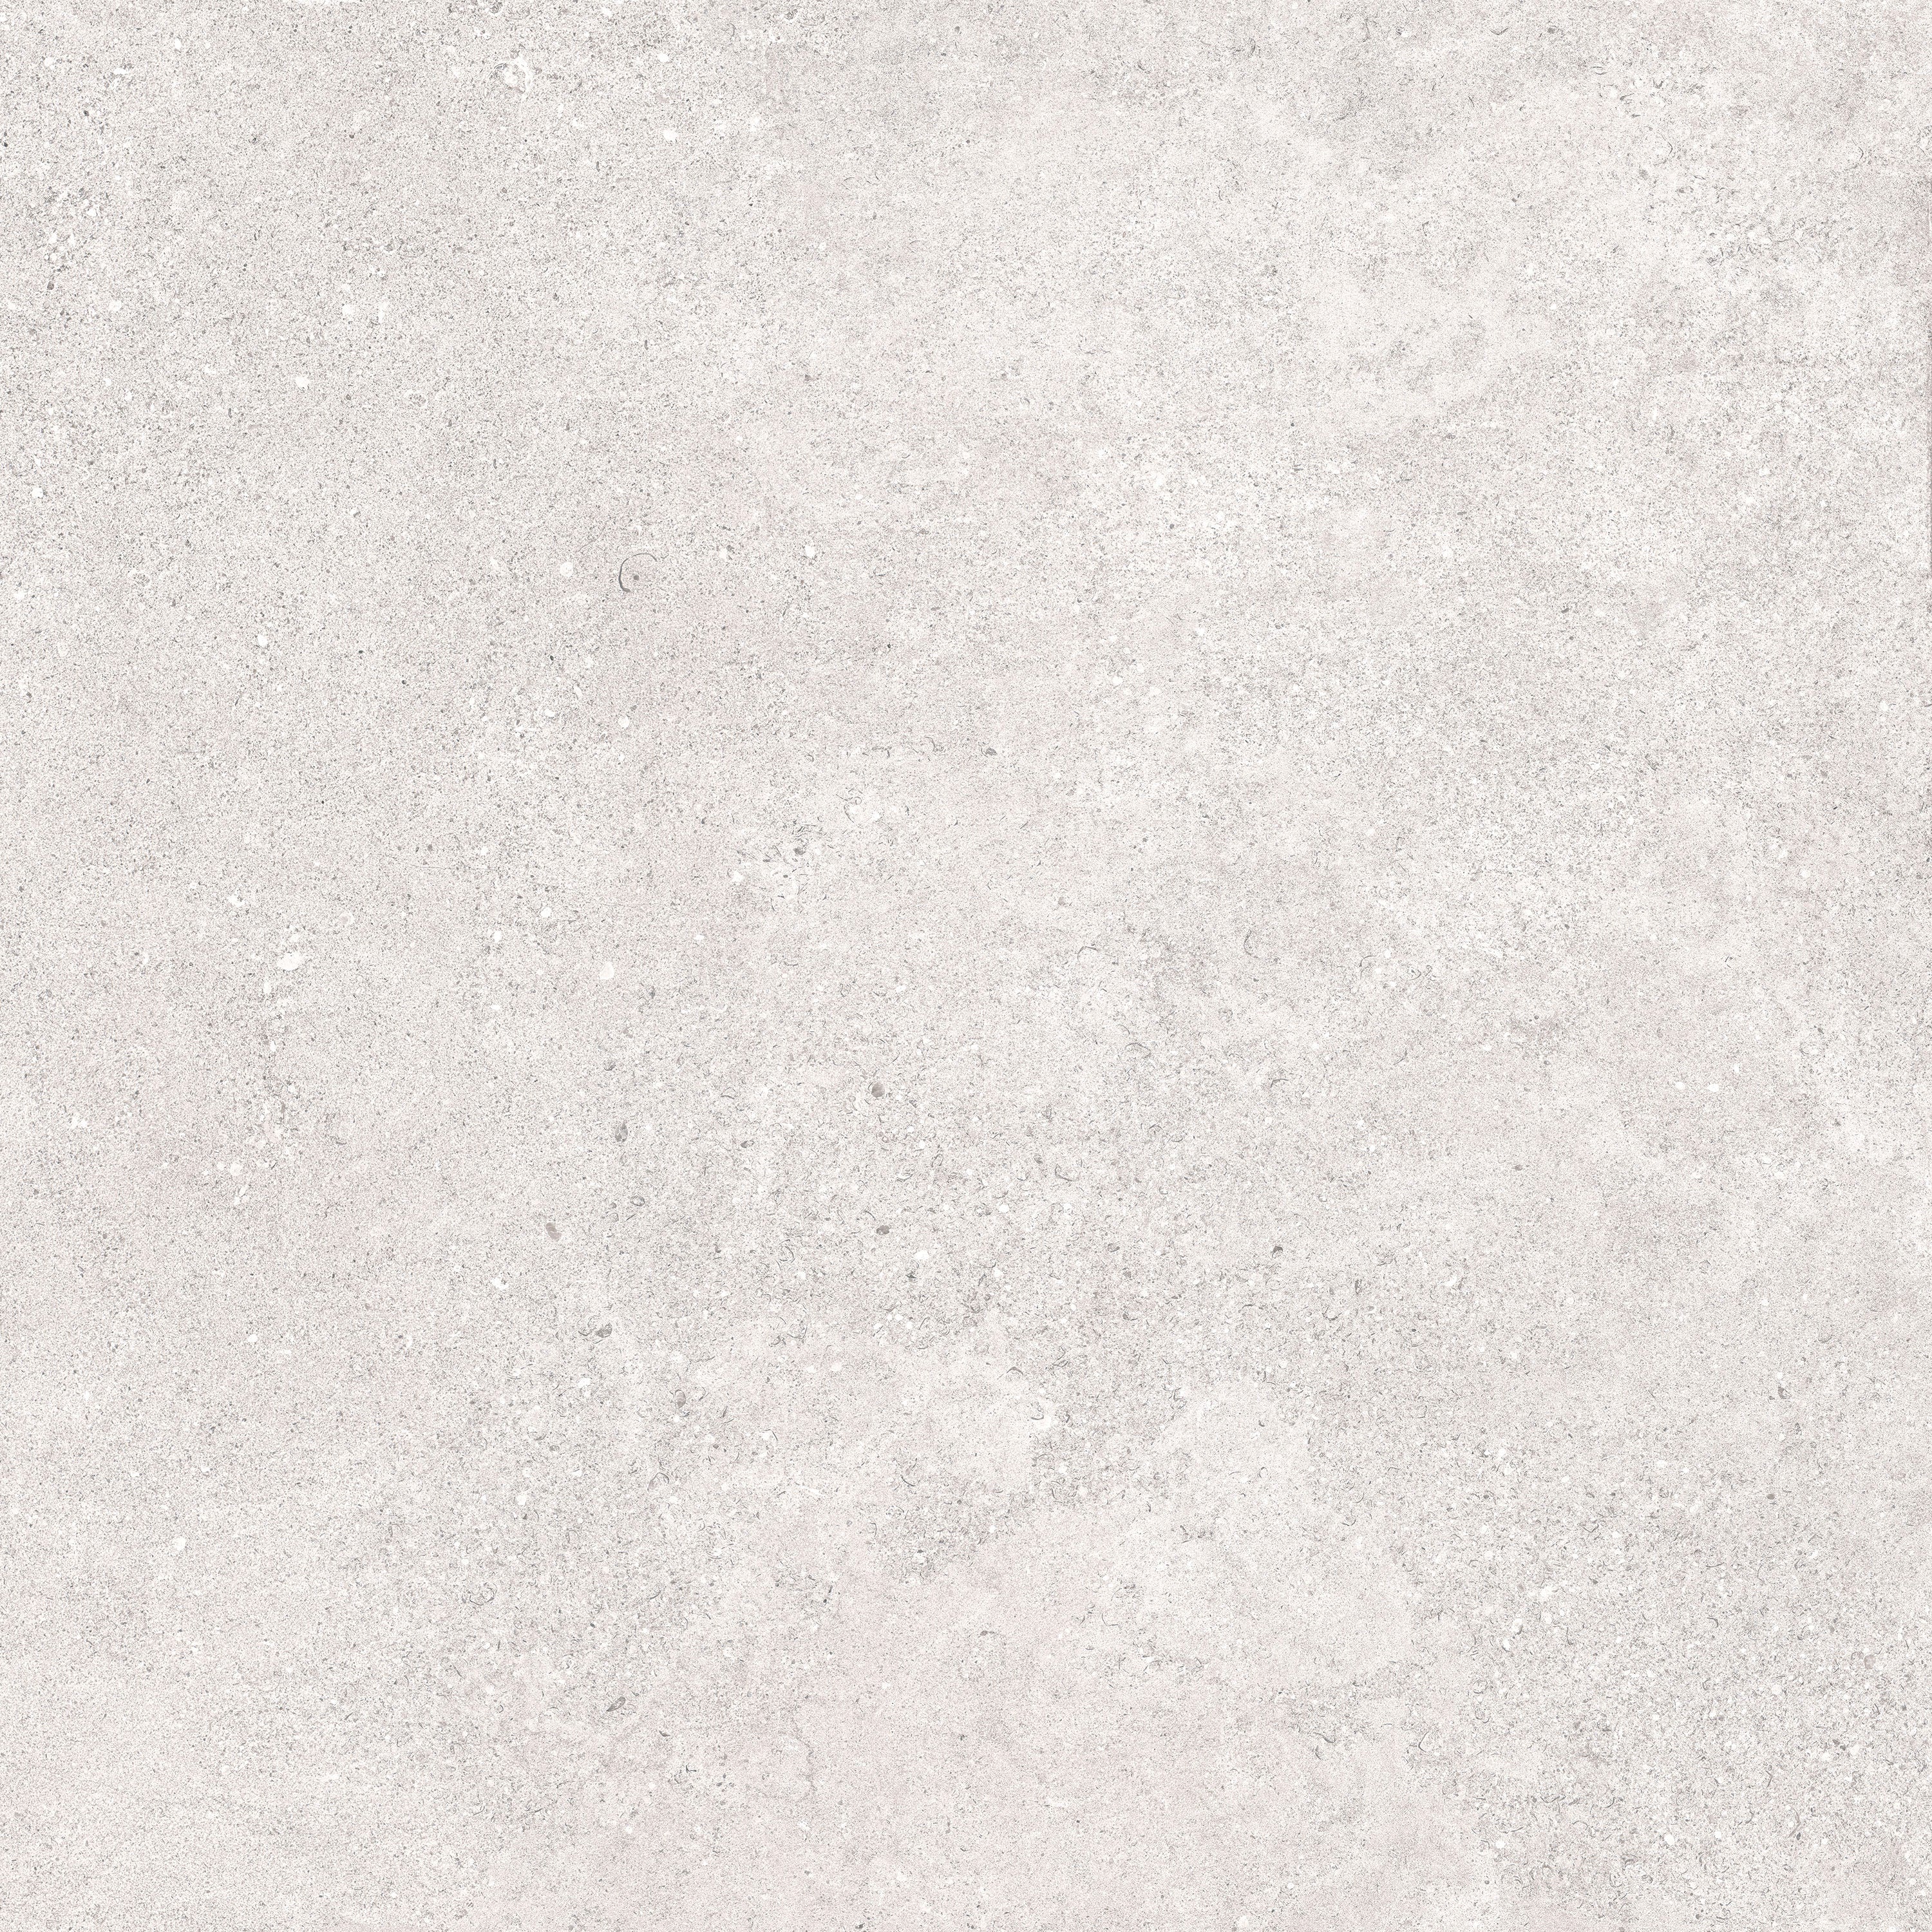 landmark frontier20 sedimentary sky paver tile 24x24x20mm matte rectified porcelain tile distributed by surface group international